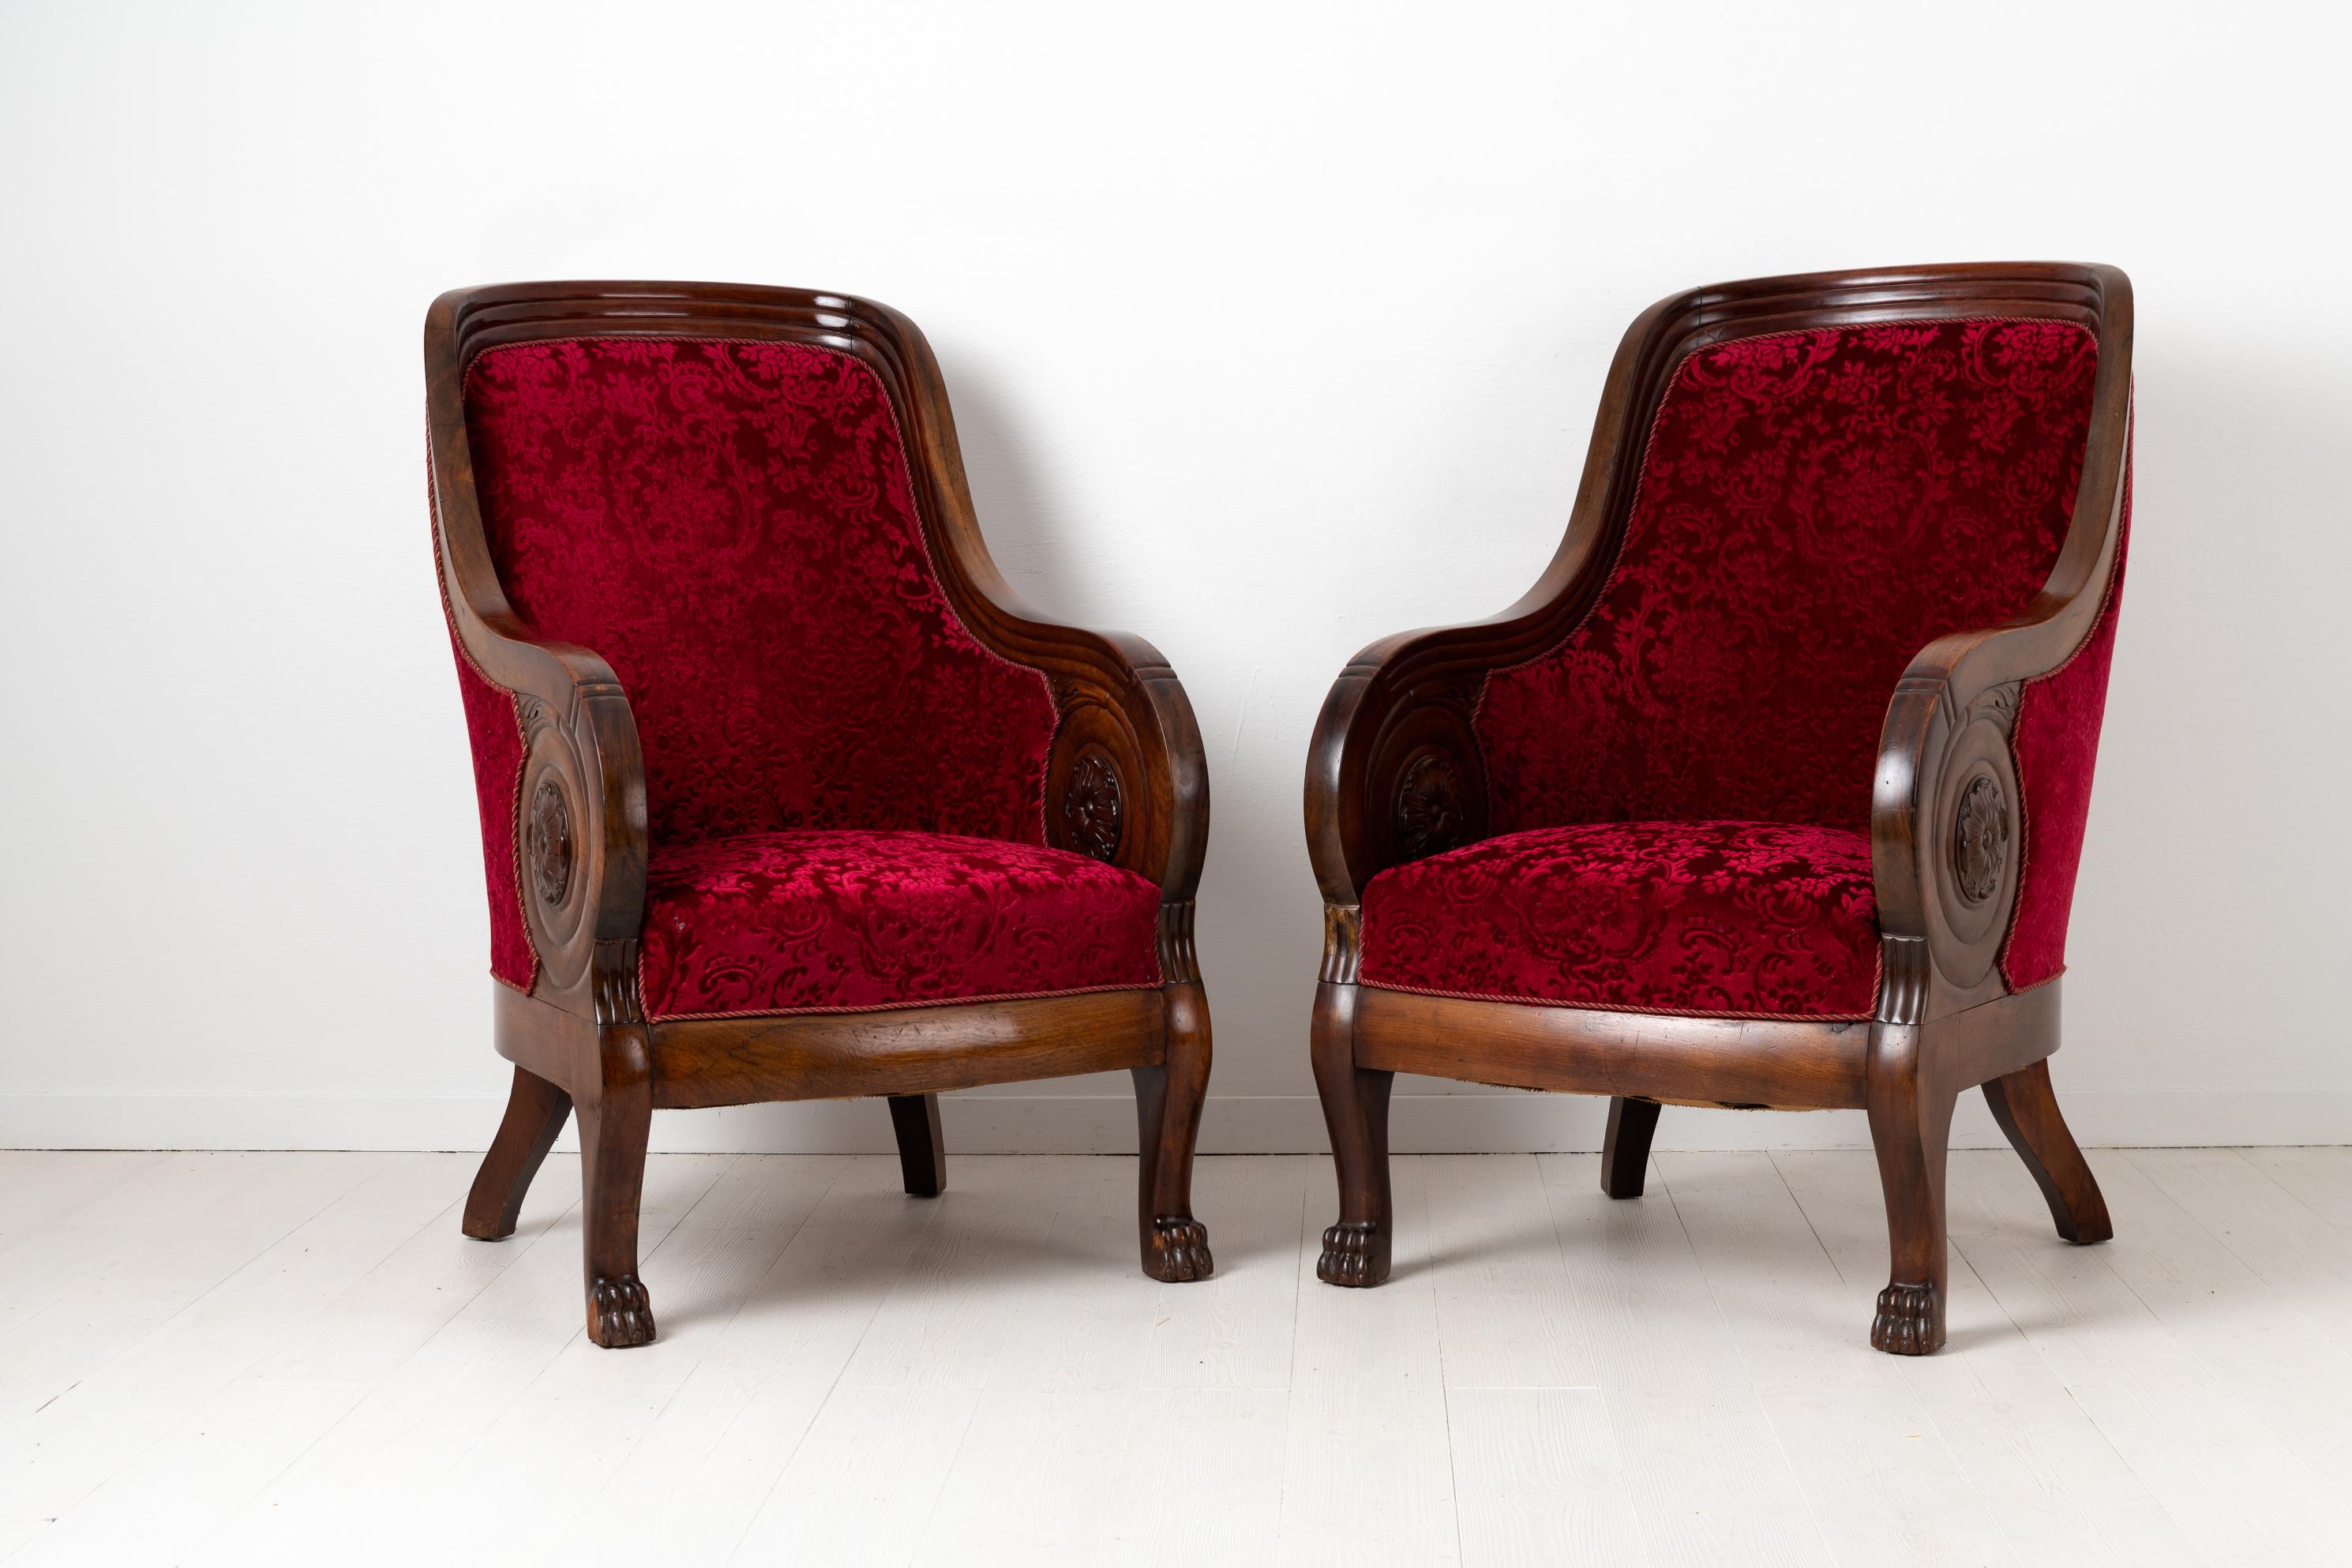 Pair of mahogany armchairs in Empire style. The chairs are from the late 1800s and are most likely from the Baltic. Upholstery in red velvet with curled armrests.
  